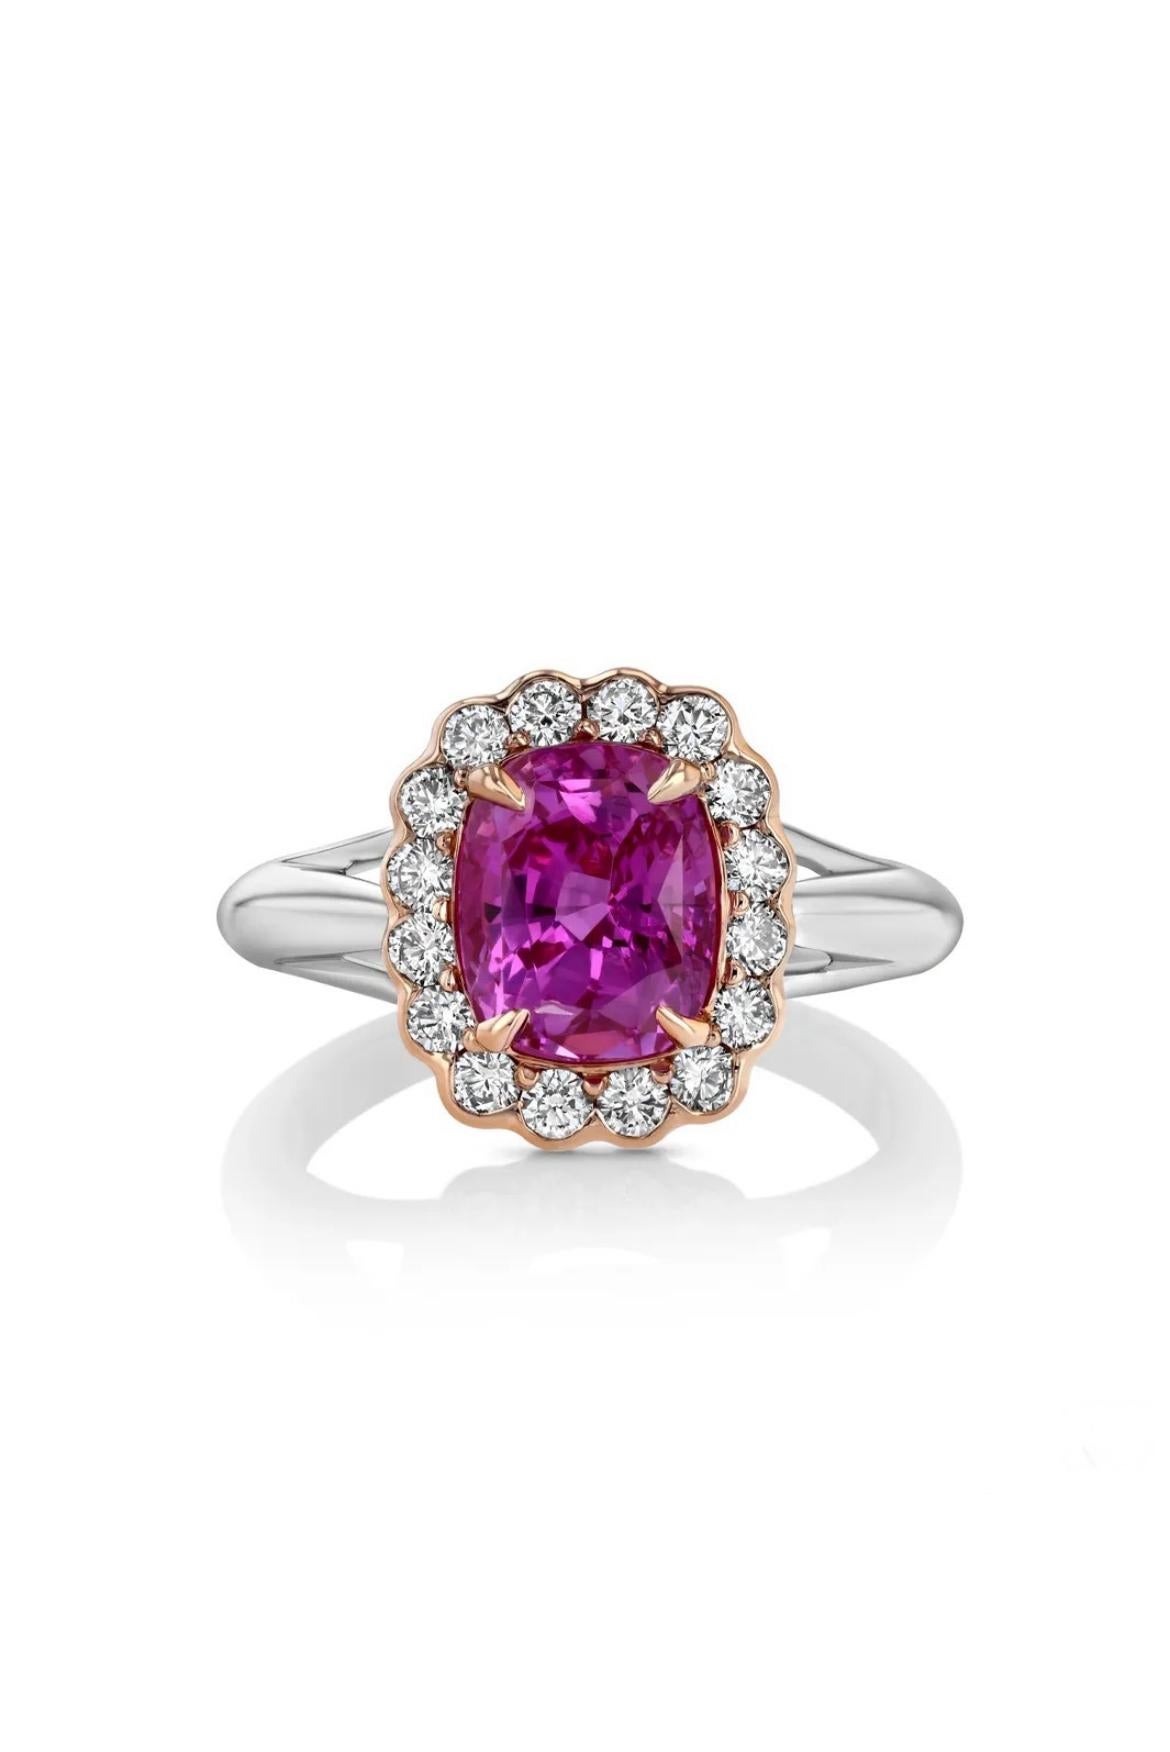 A 2.64ct cushion-cut intense Pink Sapphire from Sri Lanka is highlighted by 16 round diamonds totaling 0.41 cts. Fabricated in 18K white with rose gold. The gem is certified by a GIA report.

Pink sapphires are the world's most desirable gemstones